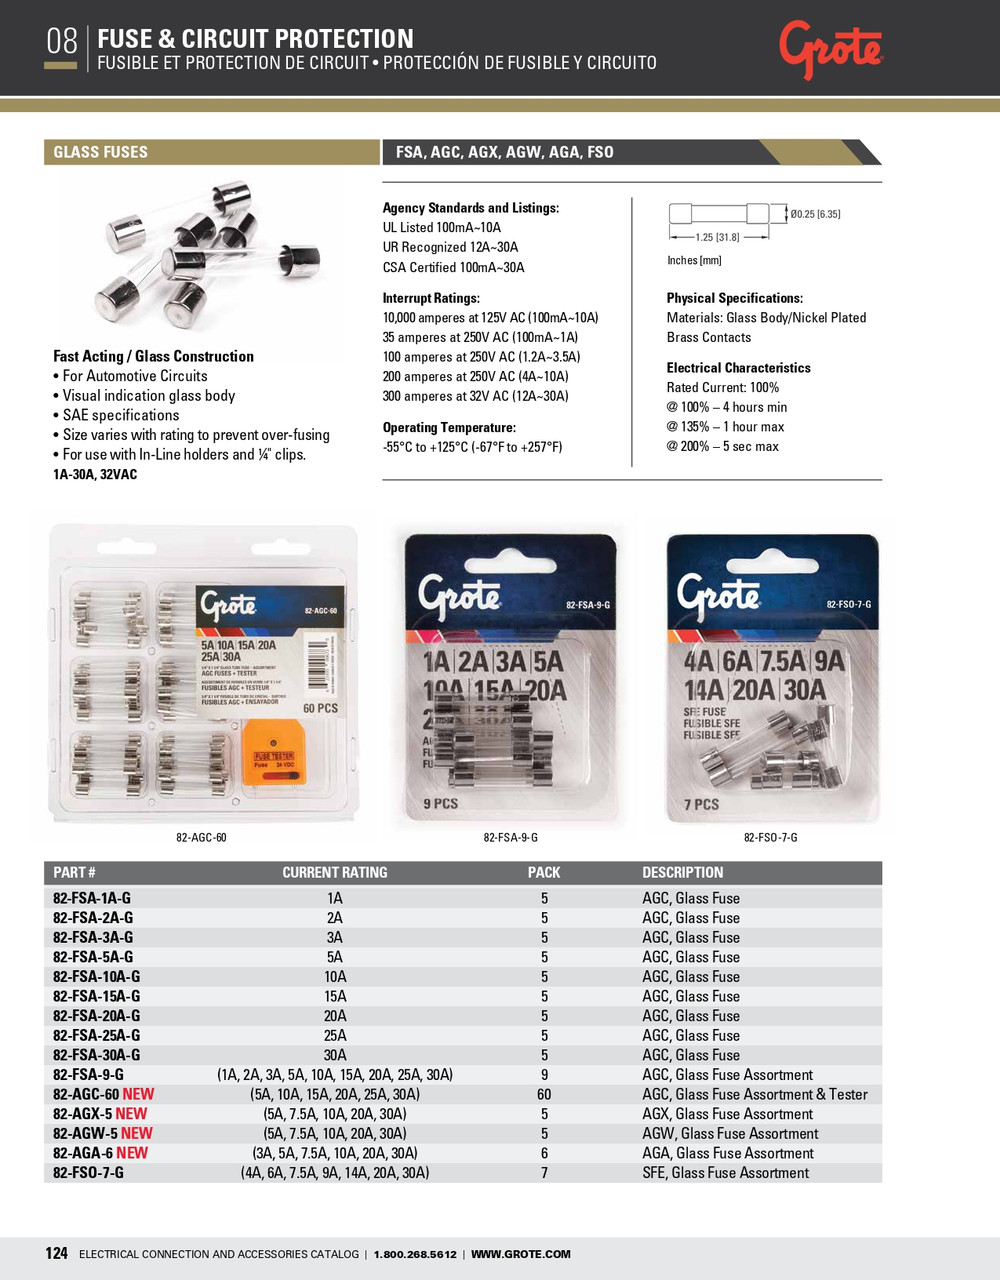 AGC Glass Fuse Assortment w/Tester @ 60 Pack  82-AGC-60